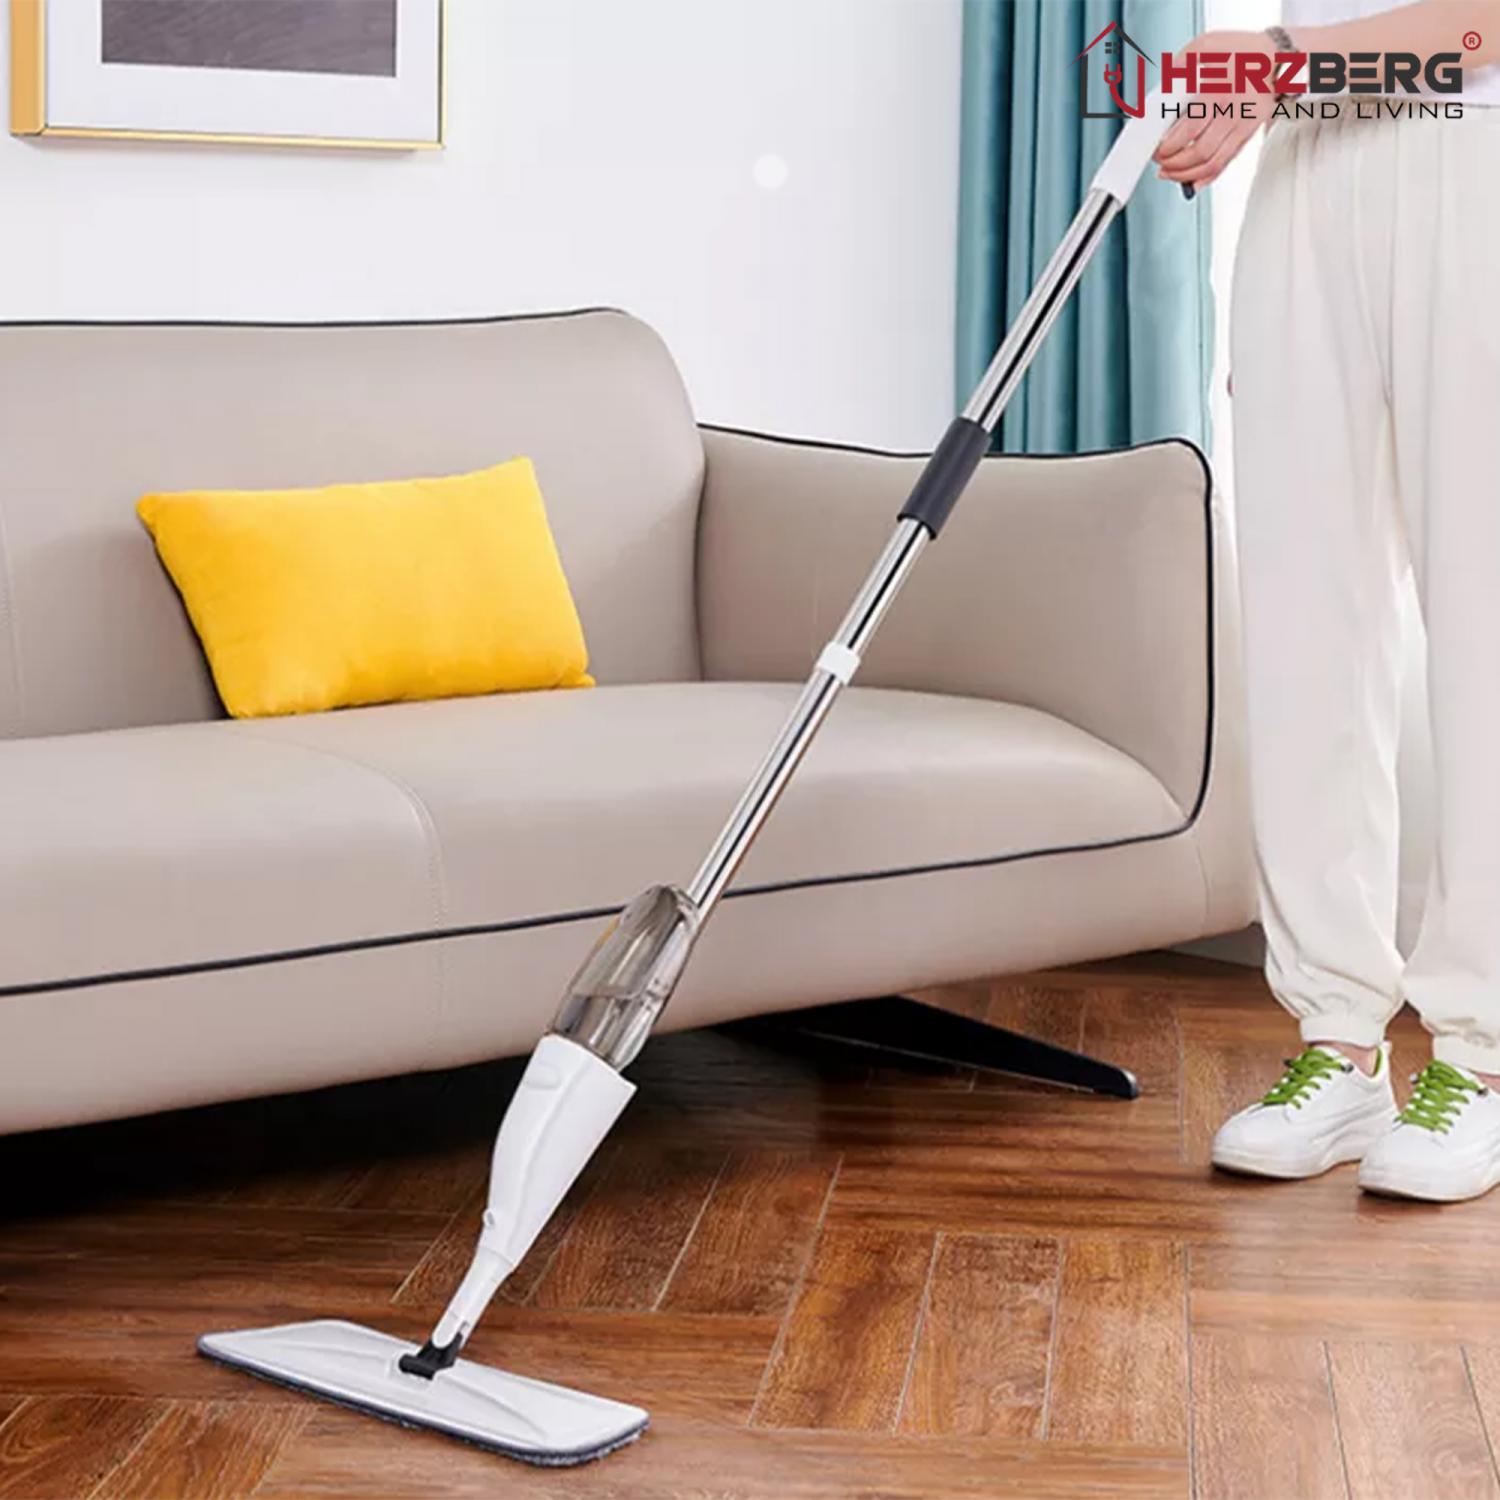 floor mop, floor cleaning, mop, cleaning mop, floor mop wity spray  herzberg,  products online, wholesaler, dropshipper, dropship, dropshipping in Europe, supplier in Europe, wholesale in Europe, online shop, e-commerce